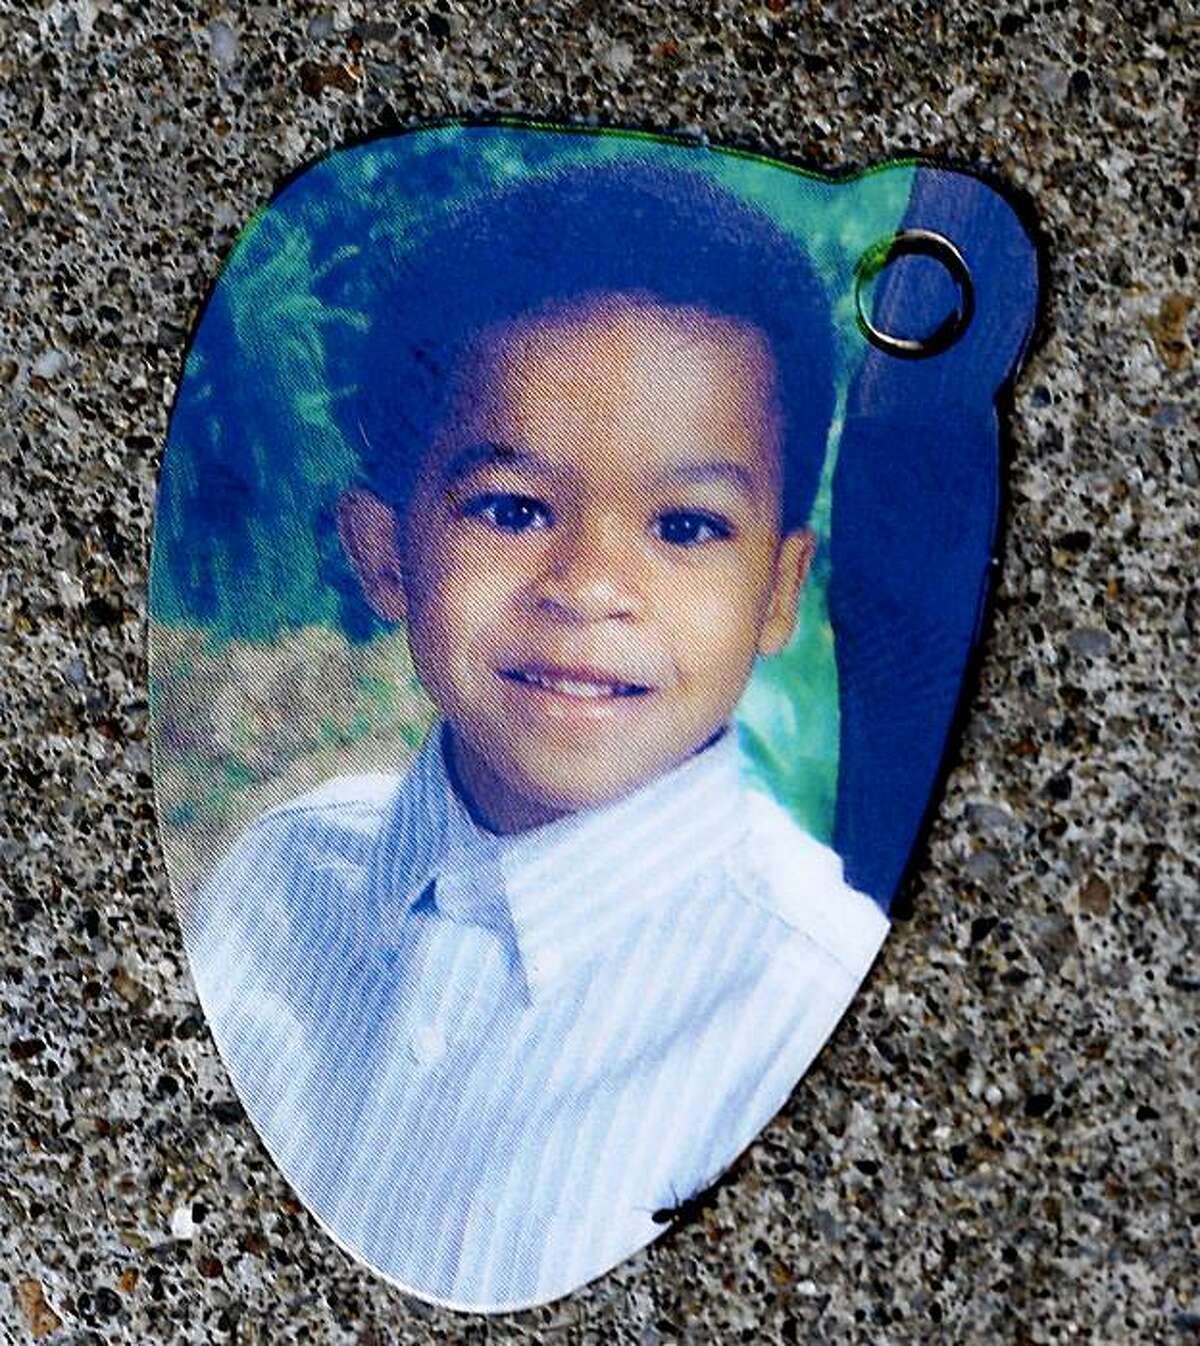 The family has a small portrait of Hasanni Campbell they wanted released. Louis Ross, the foster parent of missing child Hassani Campbell spoke to the media from the living room of his Fremont home Wednesday August 12, 2009.